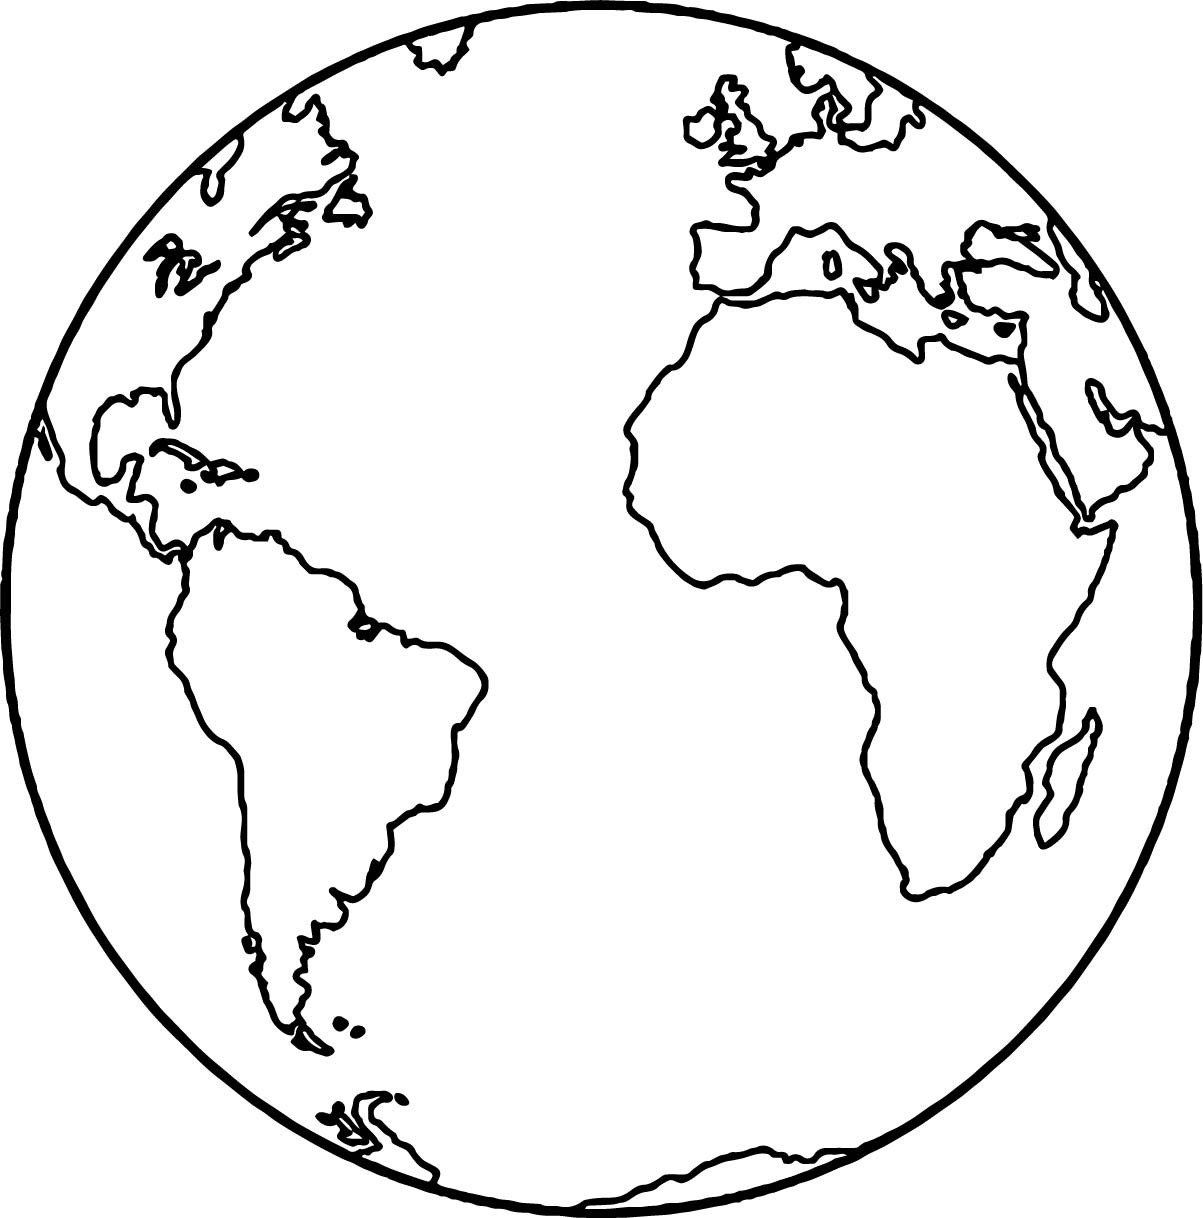 Earth Coloring Sheet
 Earth Globe Coloring Page